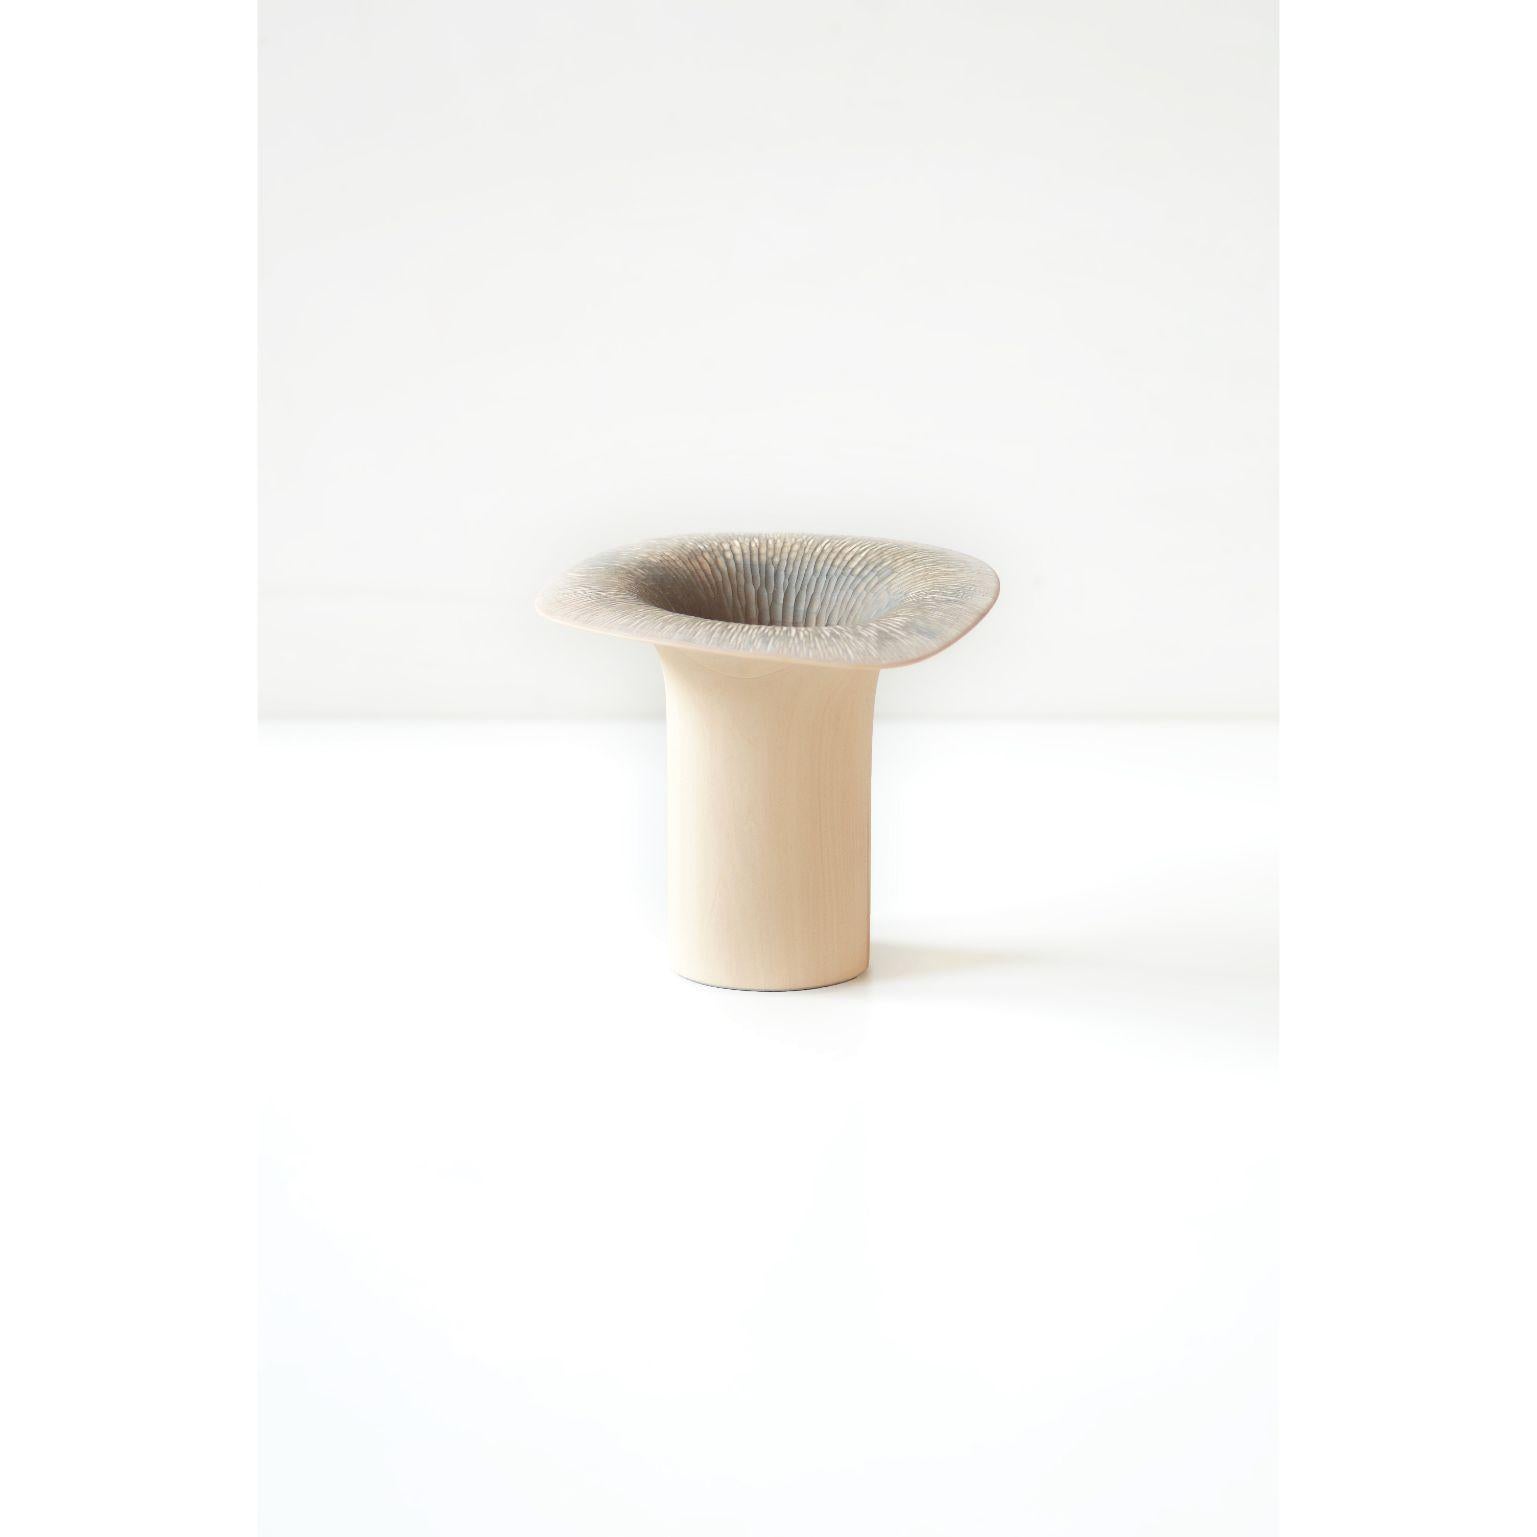 Small Light Sussin sculpture by Antrei Hartikainen
Materials: Linden wood, natural, oil wax, stain, lacquer
Dimensions: 
Width 18 cm
Depth 18 cm
Height 20 cm

Also Available: light color & different sizes

Sisin ( finnish for “quiddity” ) is a